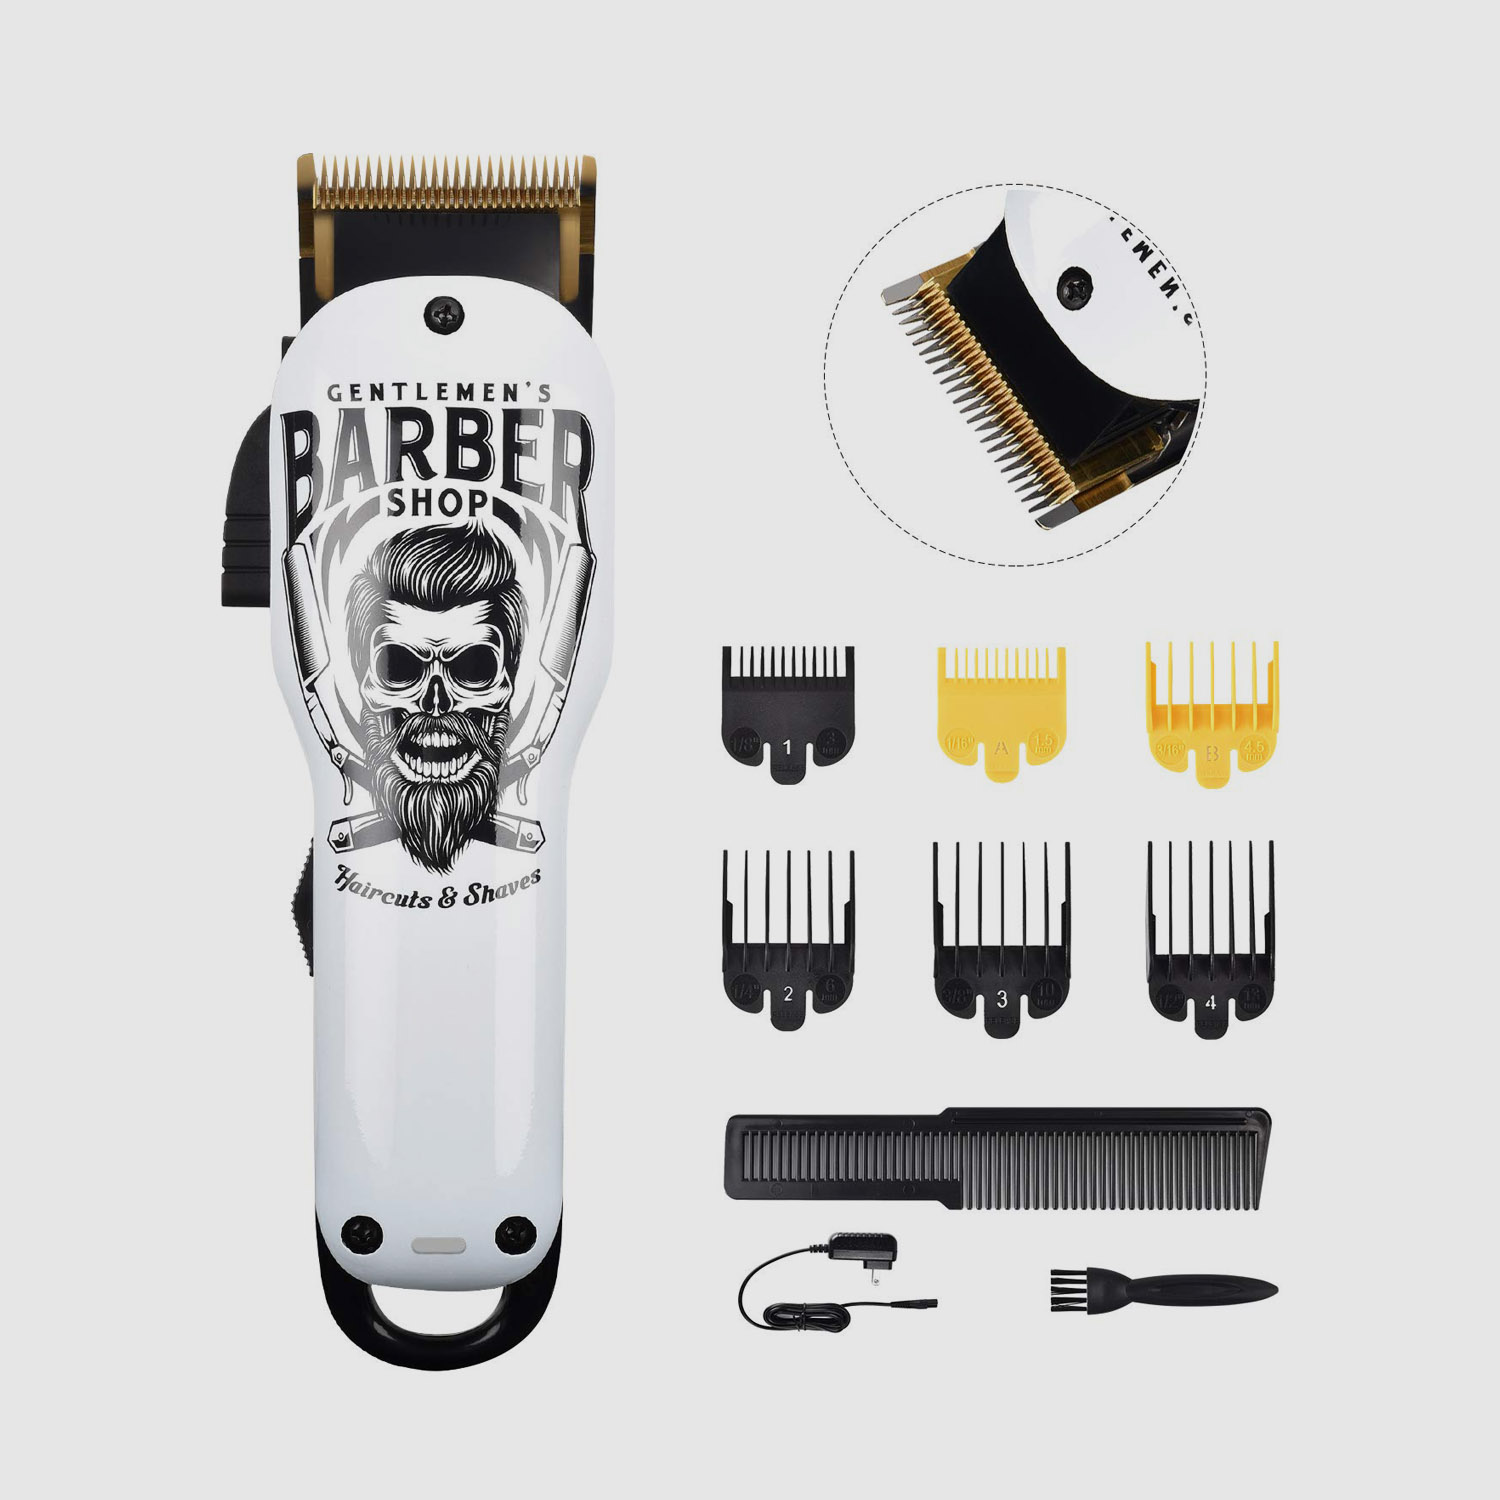 Introduction to some maintenance matters of the hair clipper